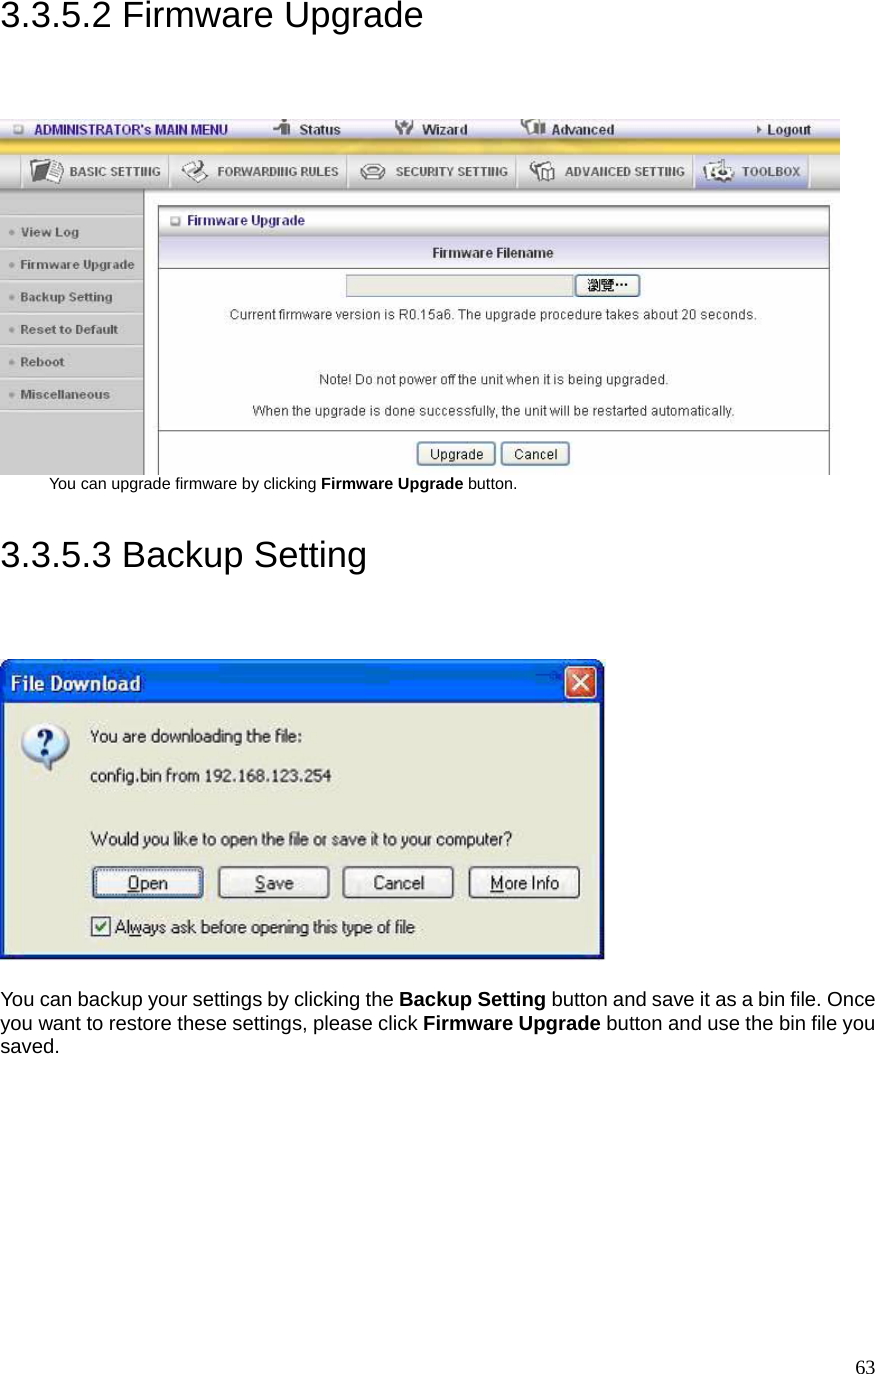  633.3.5.2 Firmware Upgrade  You can upgrade firmware by clicking Firmware Upgrade button.  3.3.5.3 Backup Setting   You can backup your settings by clicking the Backup Setting button and save it as a bin file. Once you want to restore these settings, please click Firmware Upgrade button and use the bin file you saved.  